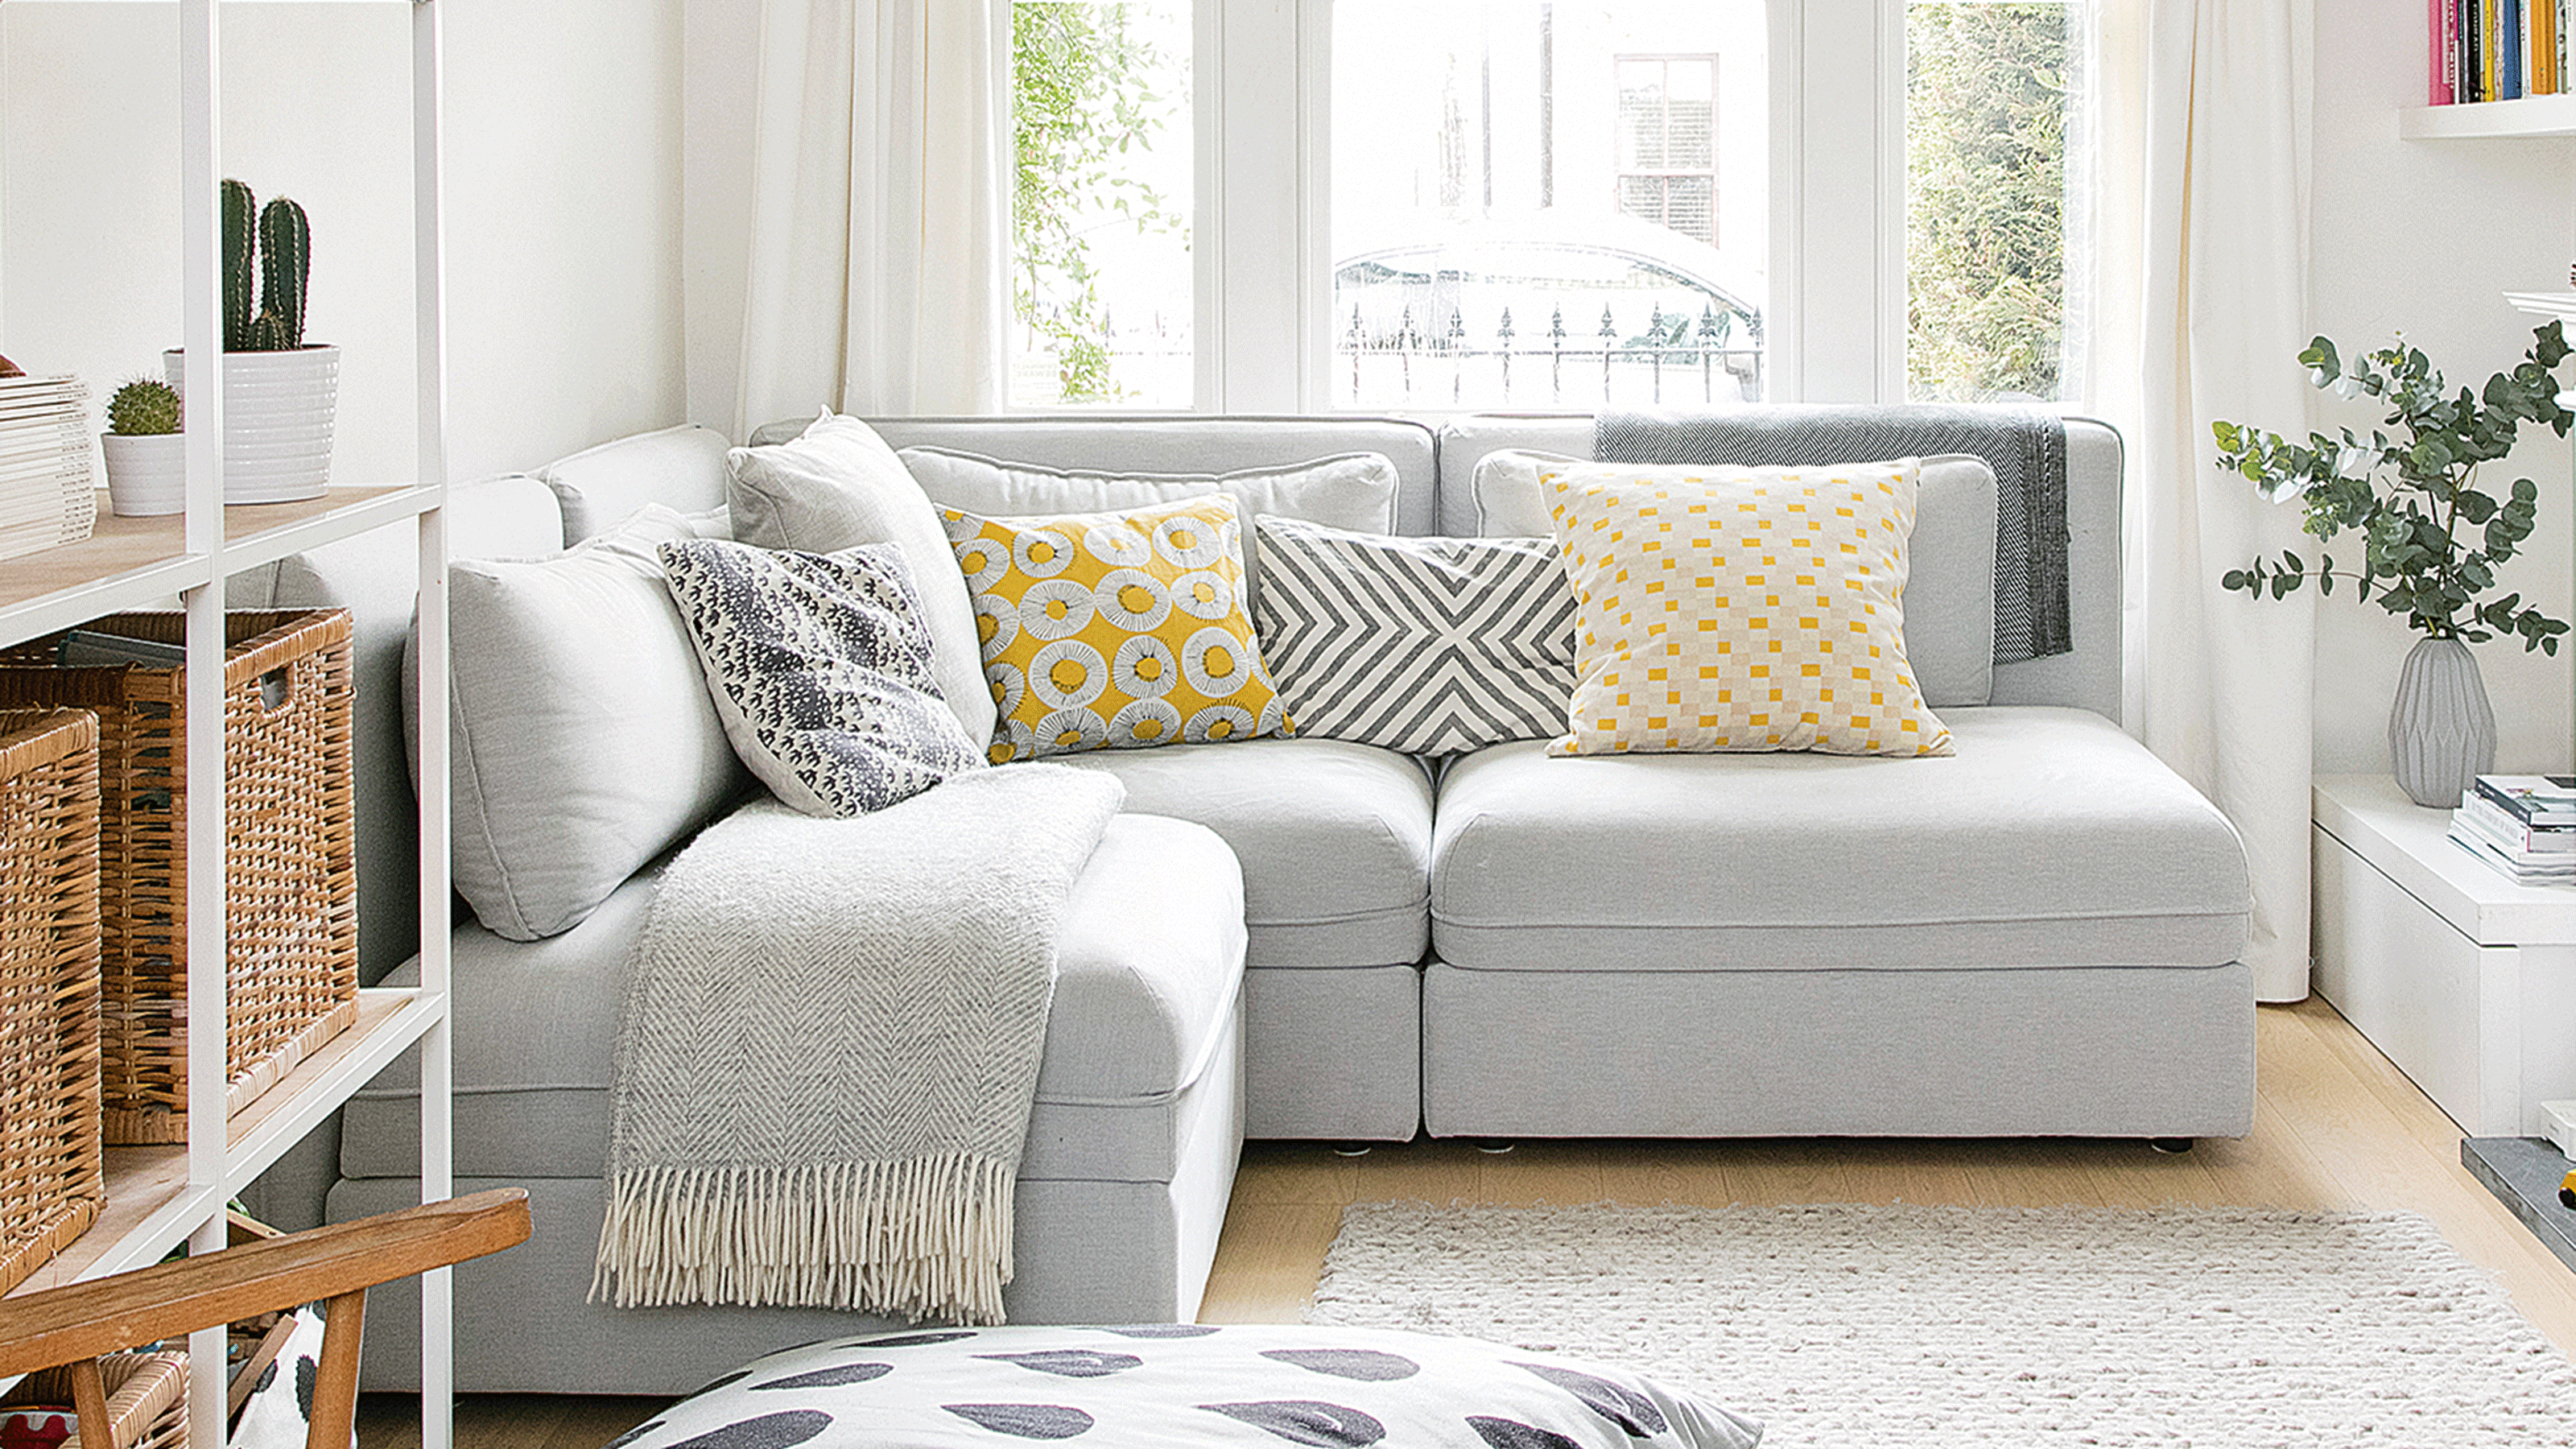 16 Sofa Ideas For Small Living Rooms: Looks, Styles And Tips | Ideal Home